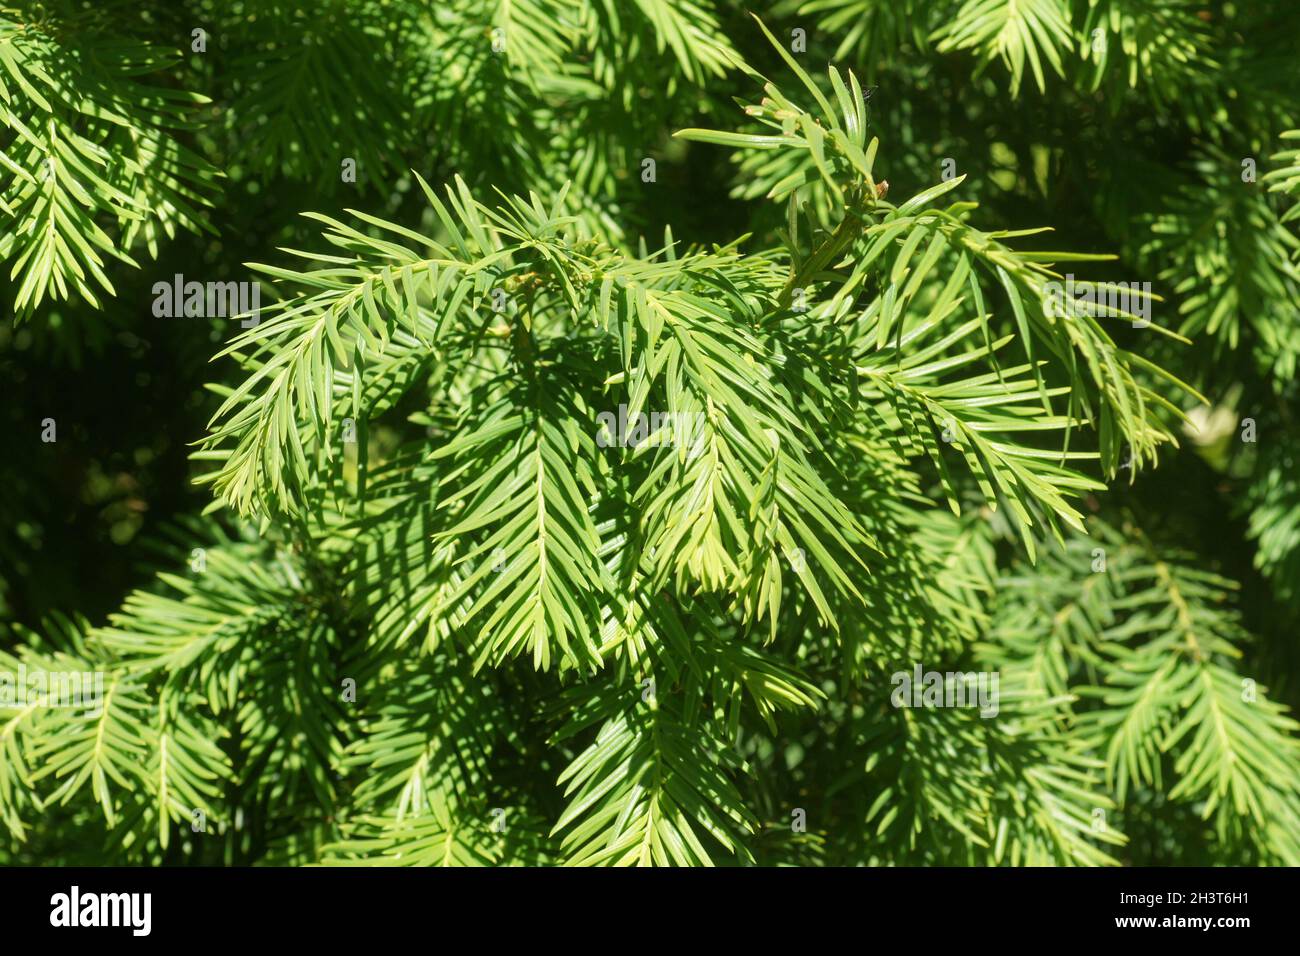 Taxus baccata, Yew, young leaves Stock Photo